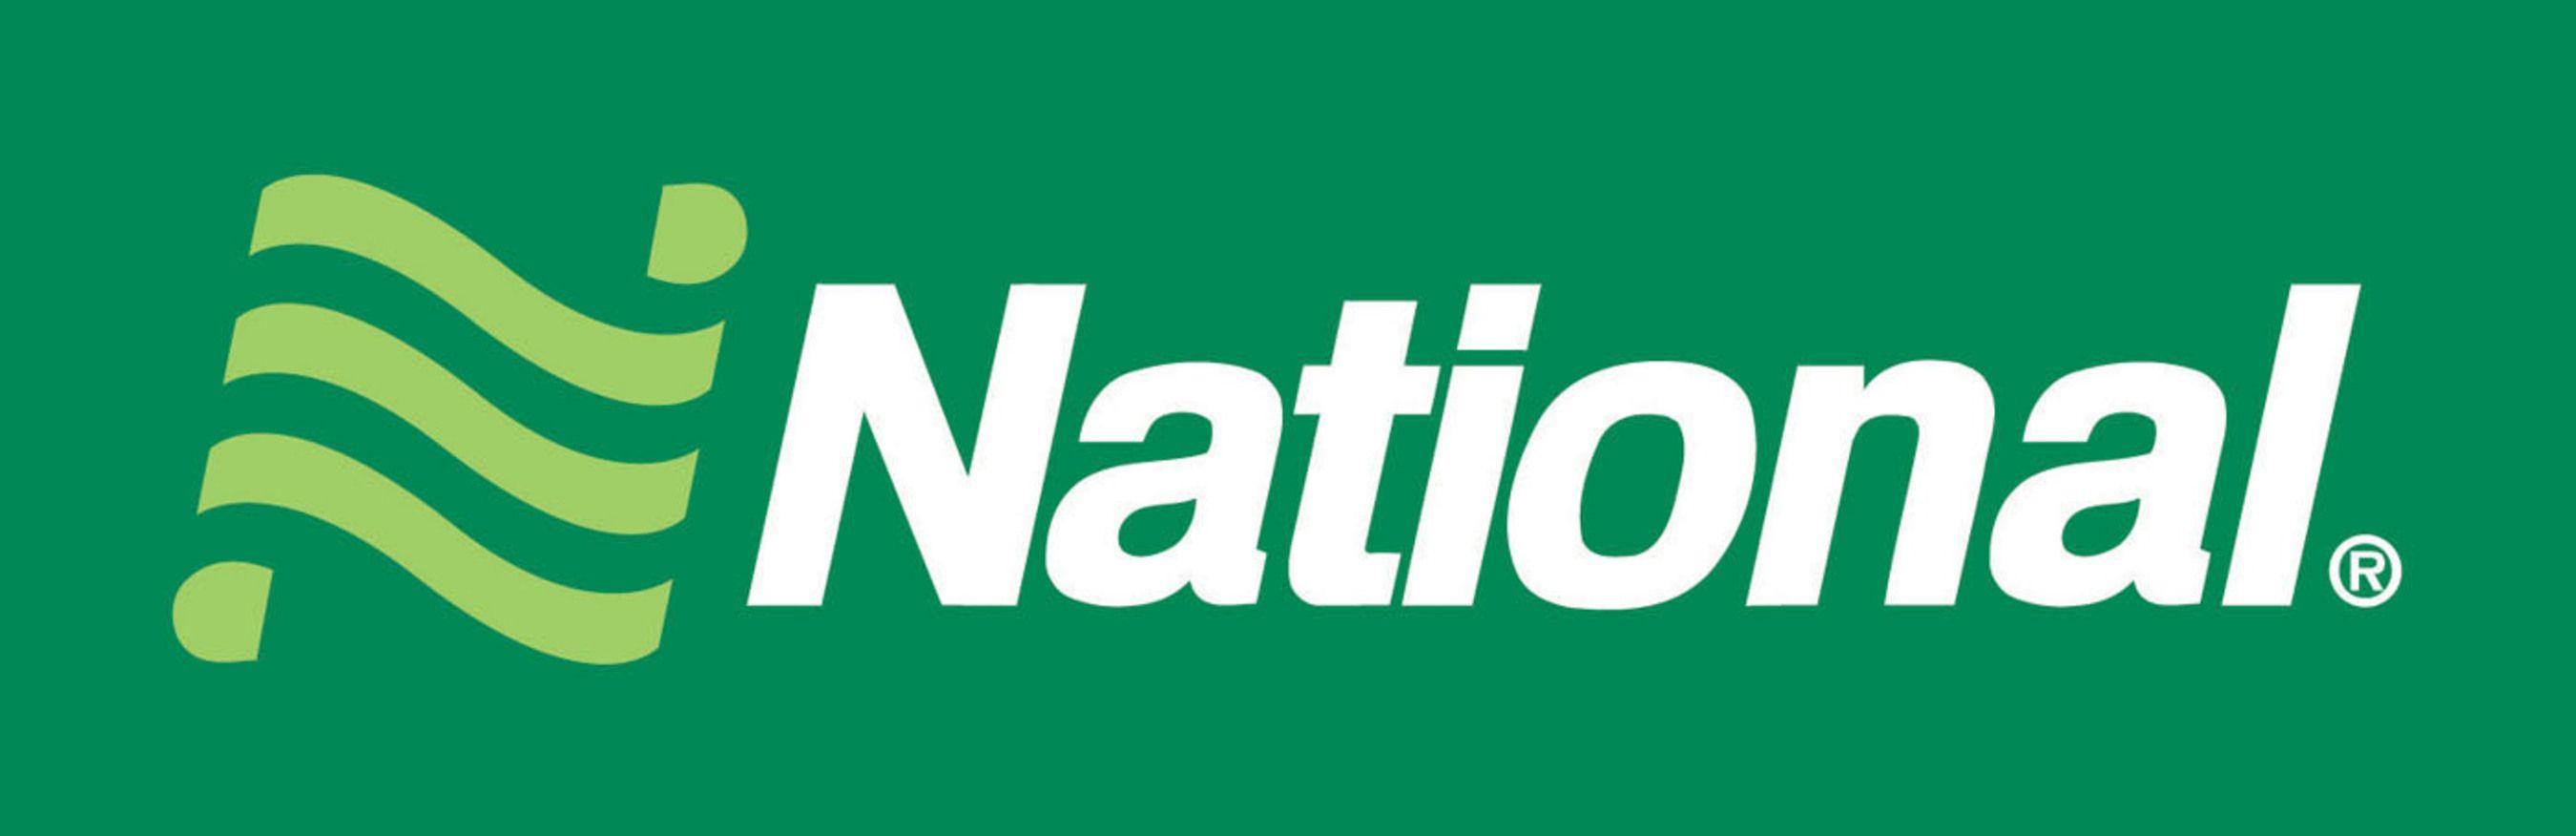 National Car Rental Logo - National Car Rental Offers Emerald Club Members Special Access to